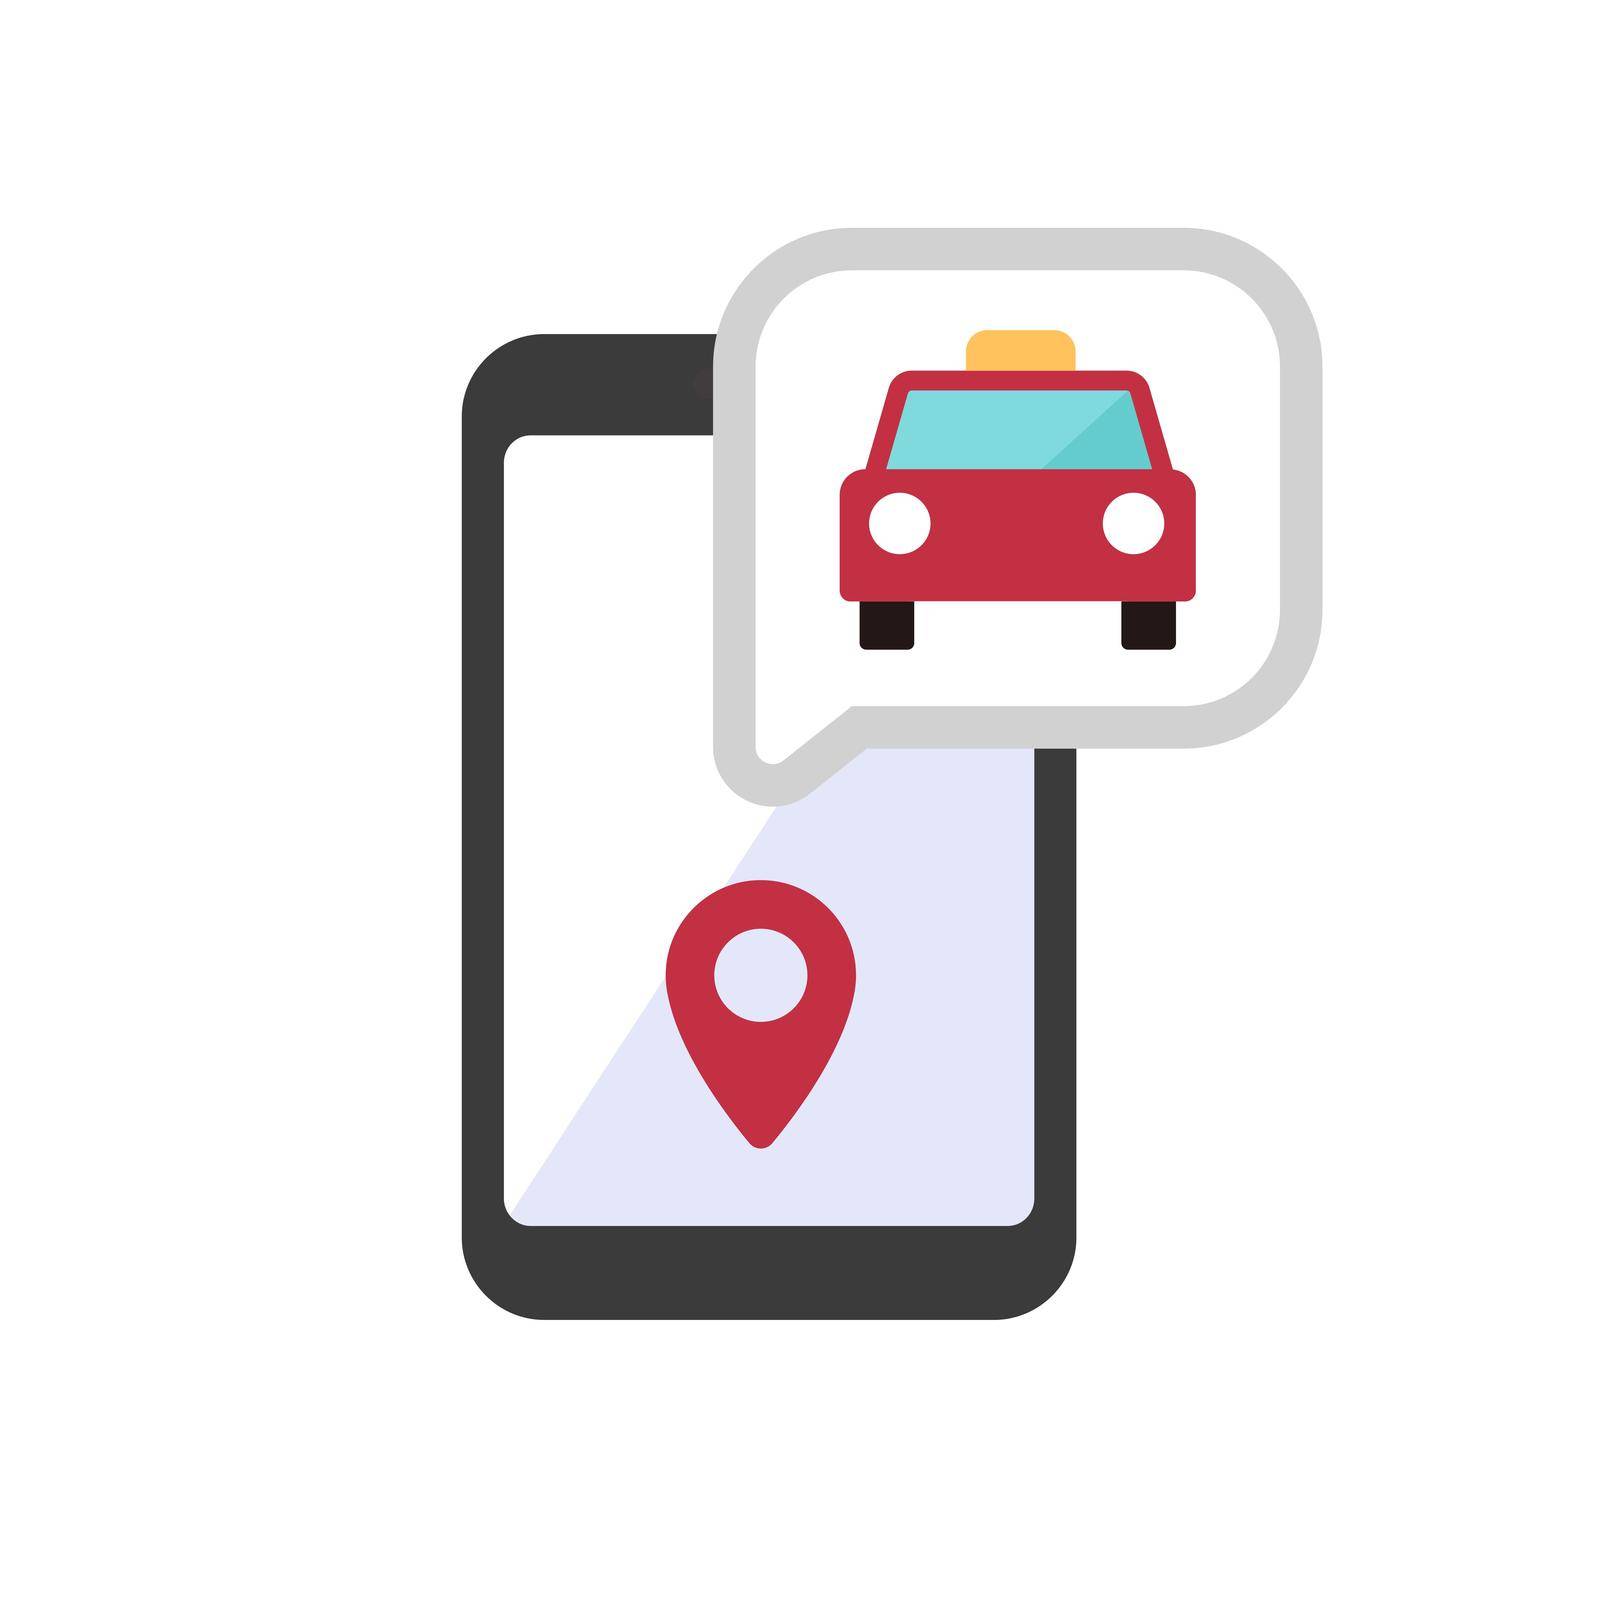 Taxi (cab) app, ride share app vector icon illustration